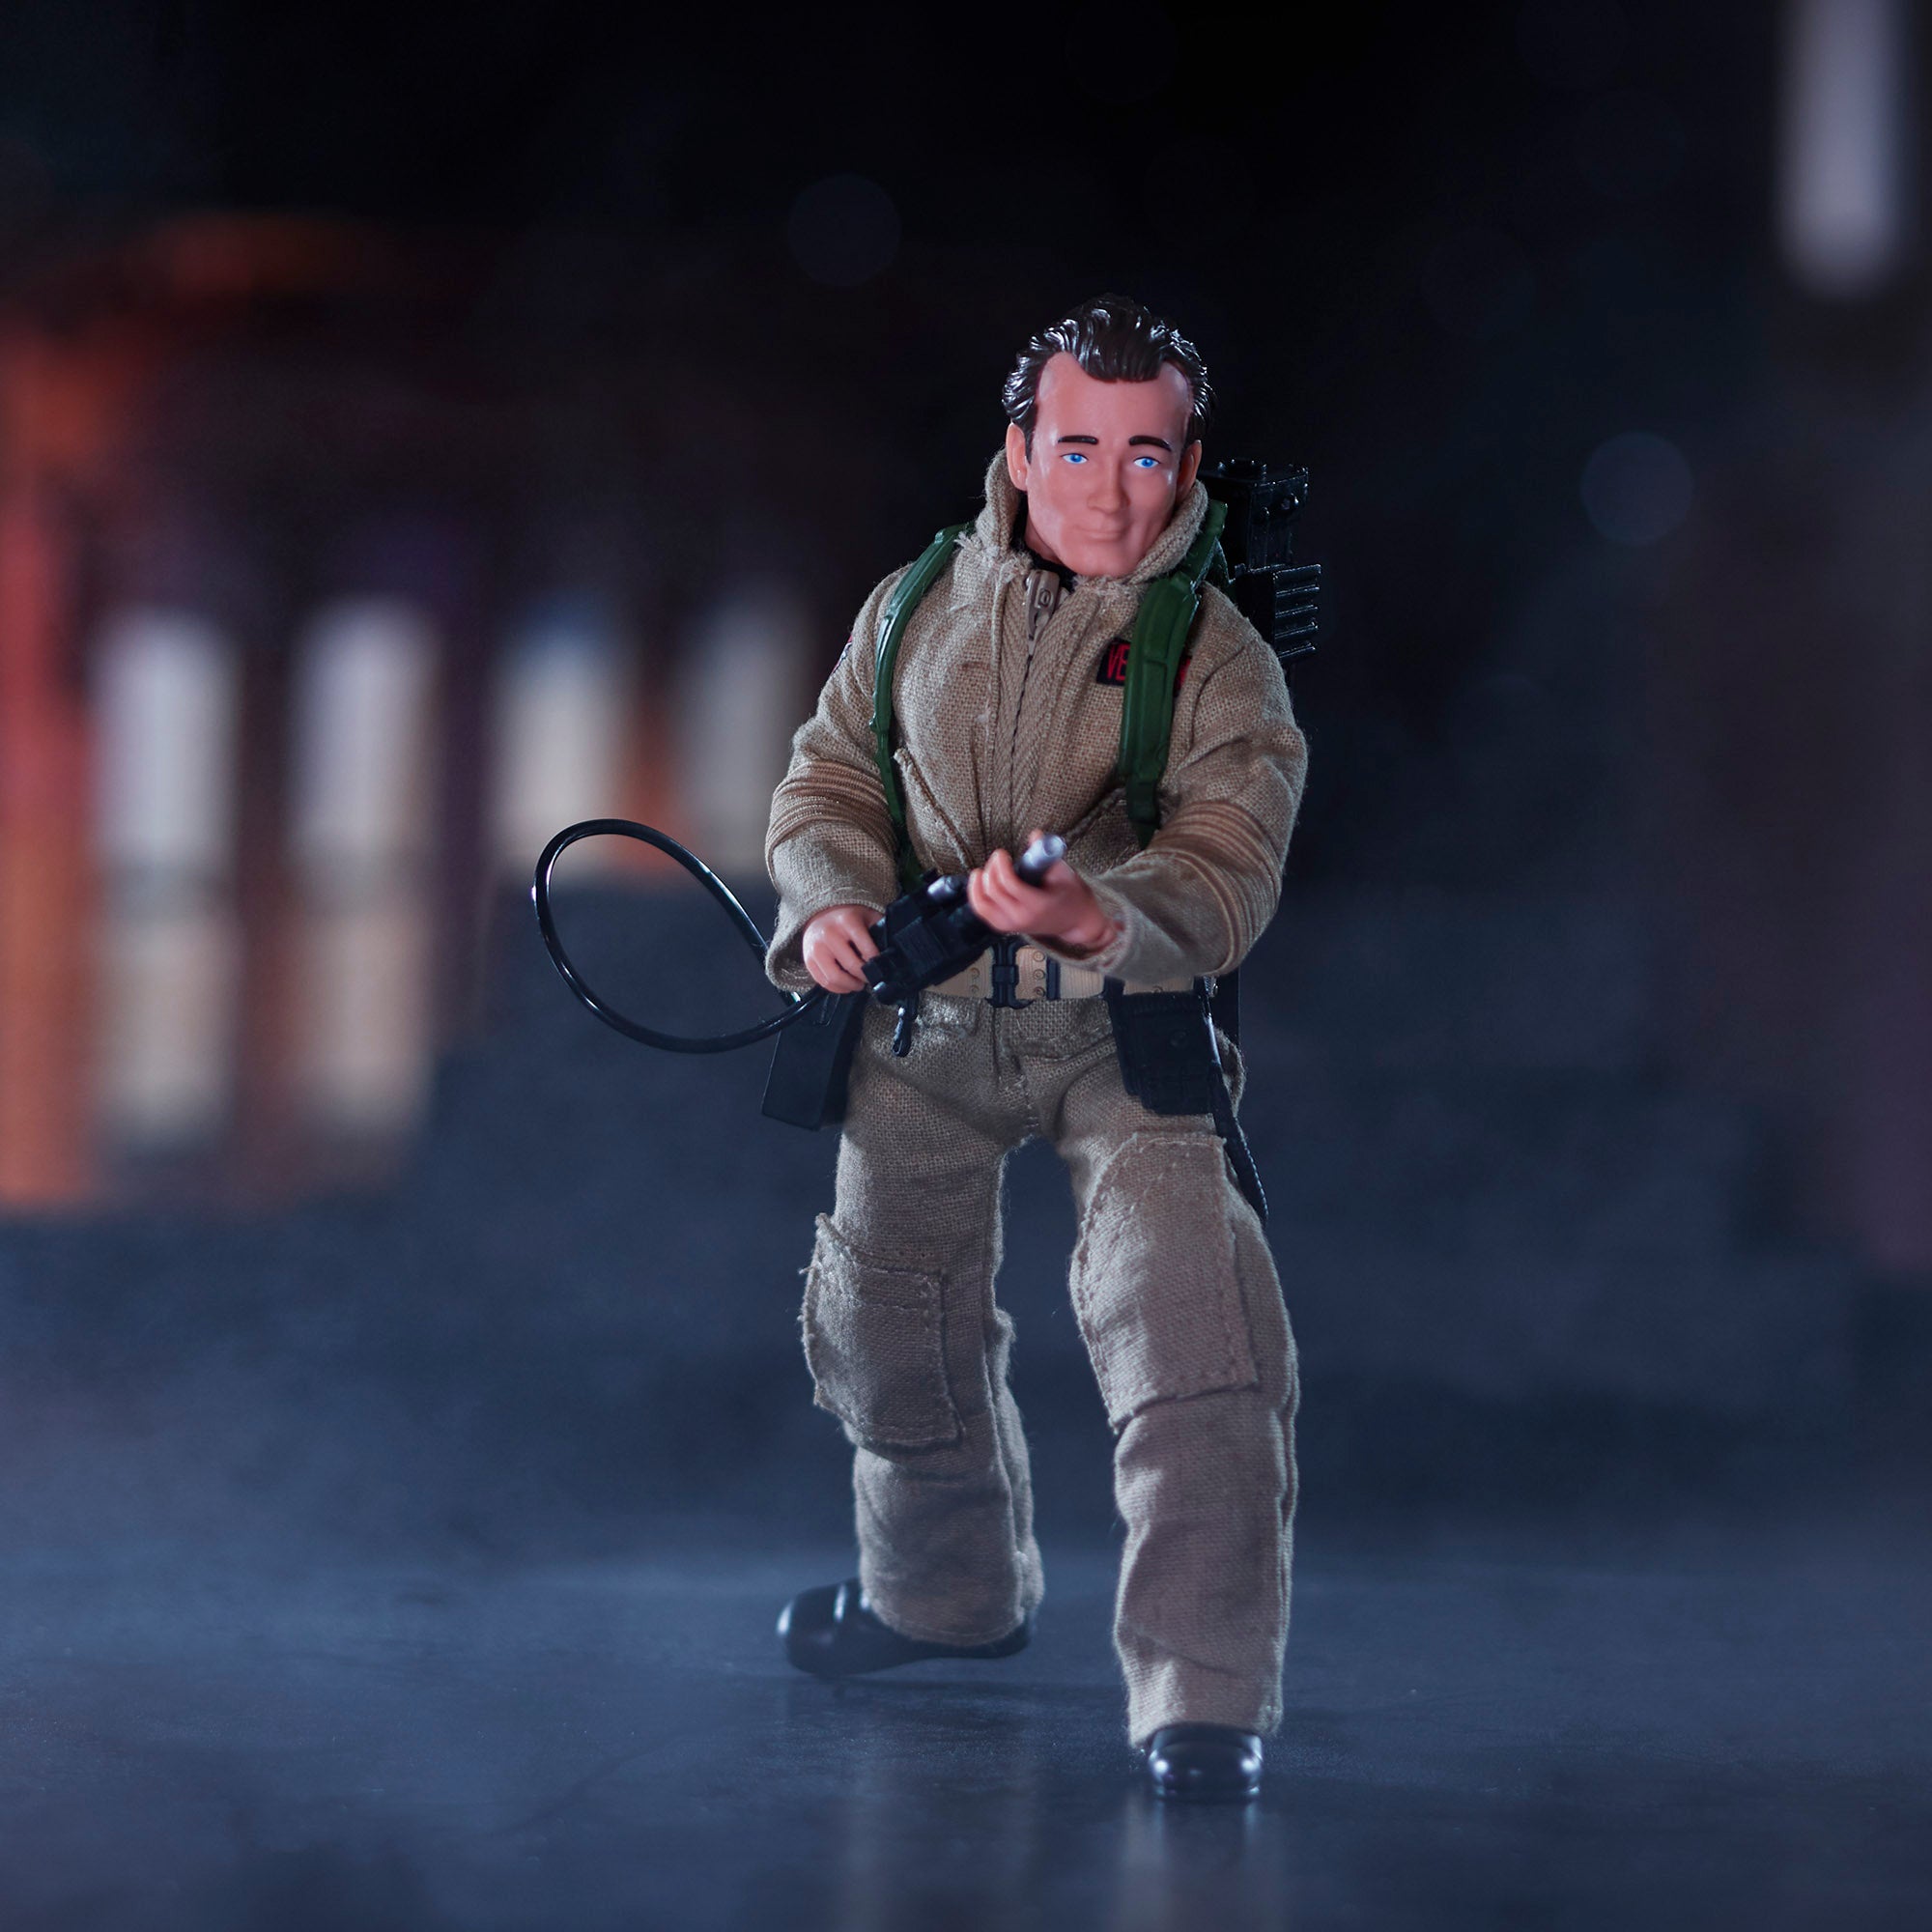 Ghostbusters x Mego 17